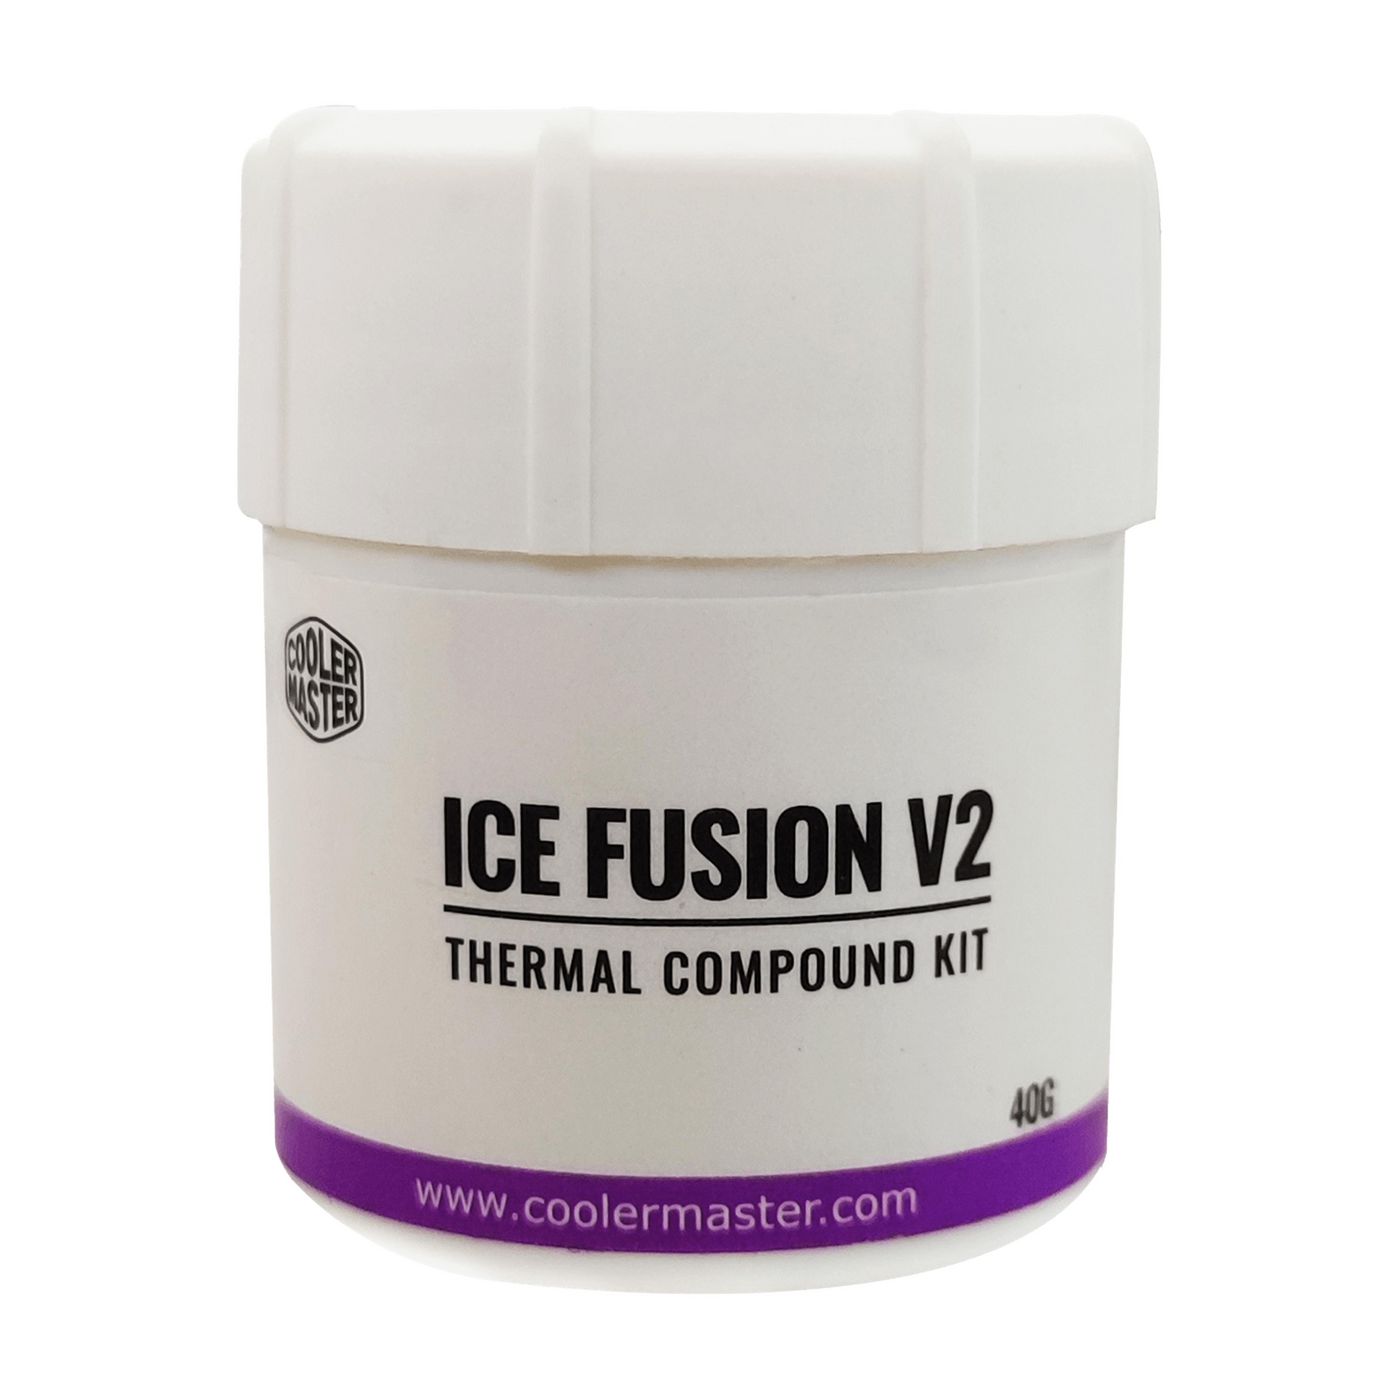 COOLERMASTER Ice Fusion V2 Heat Sink